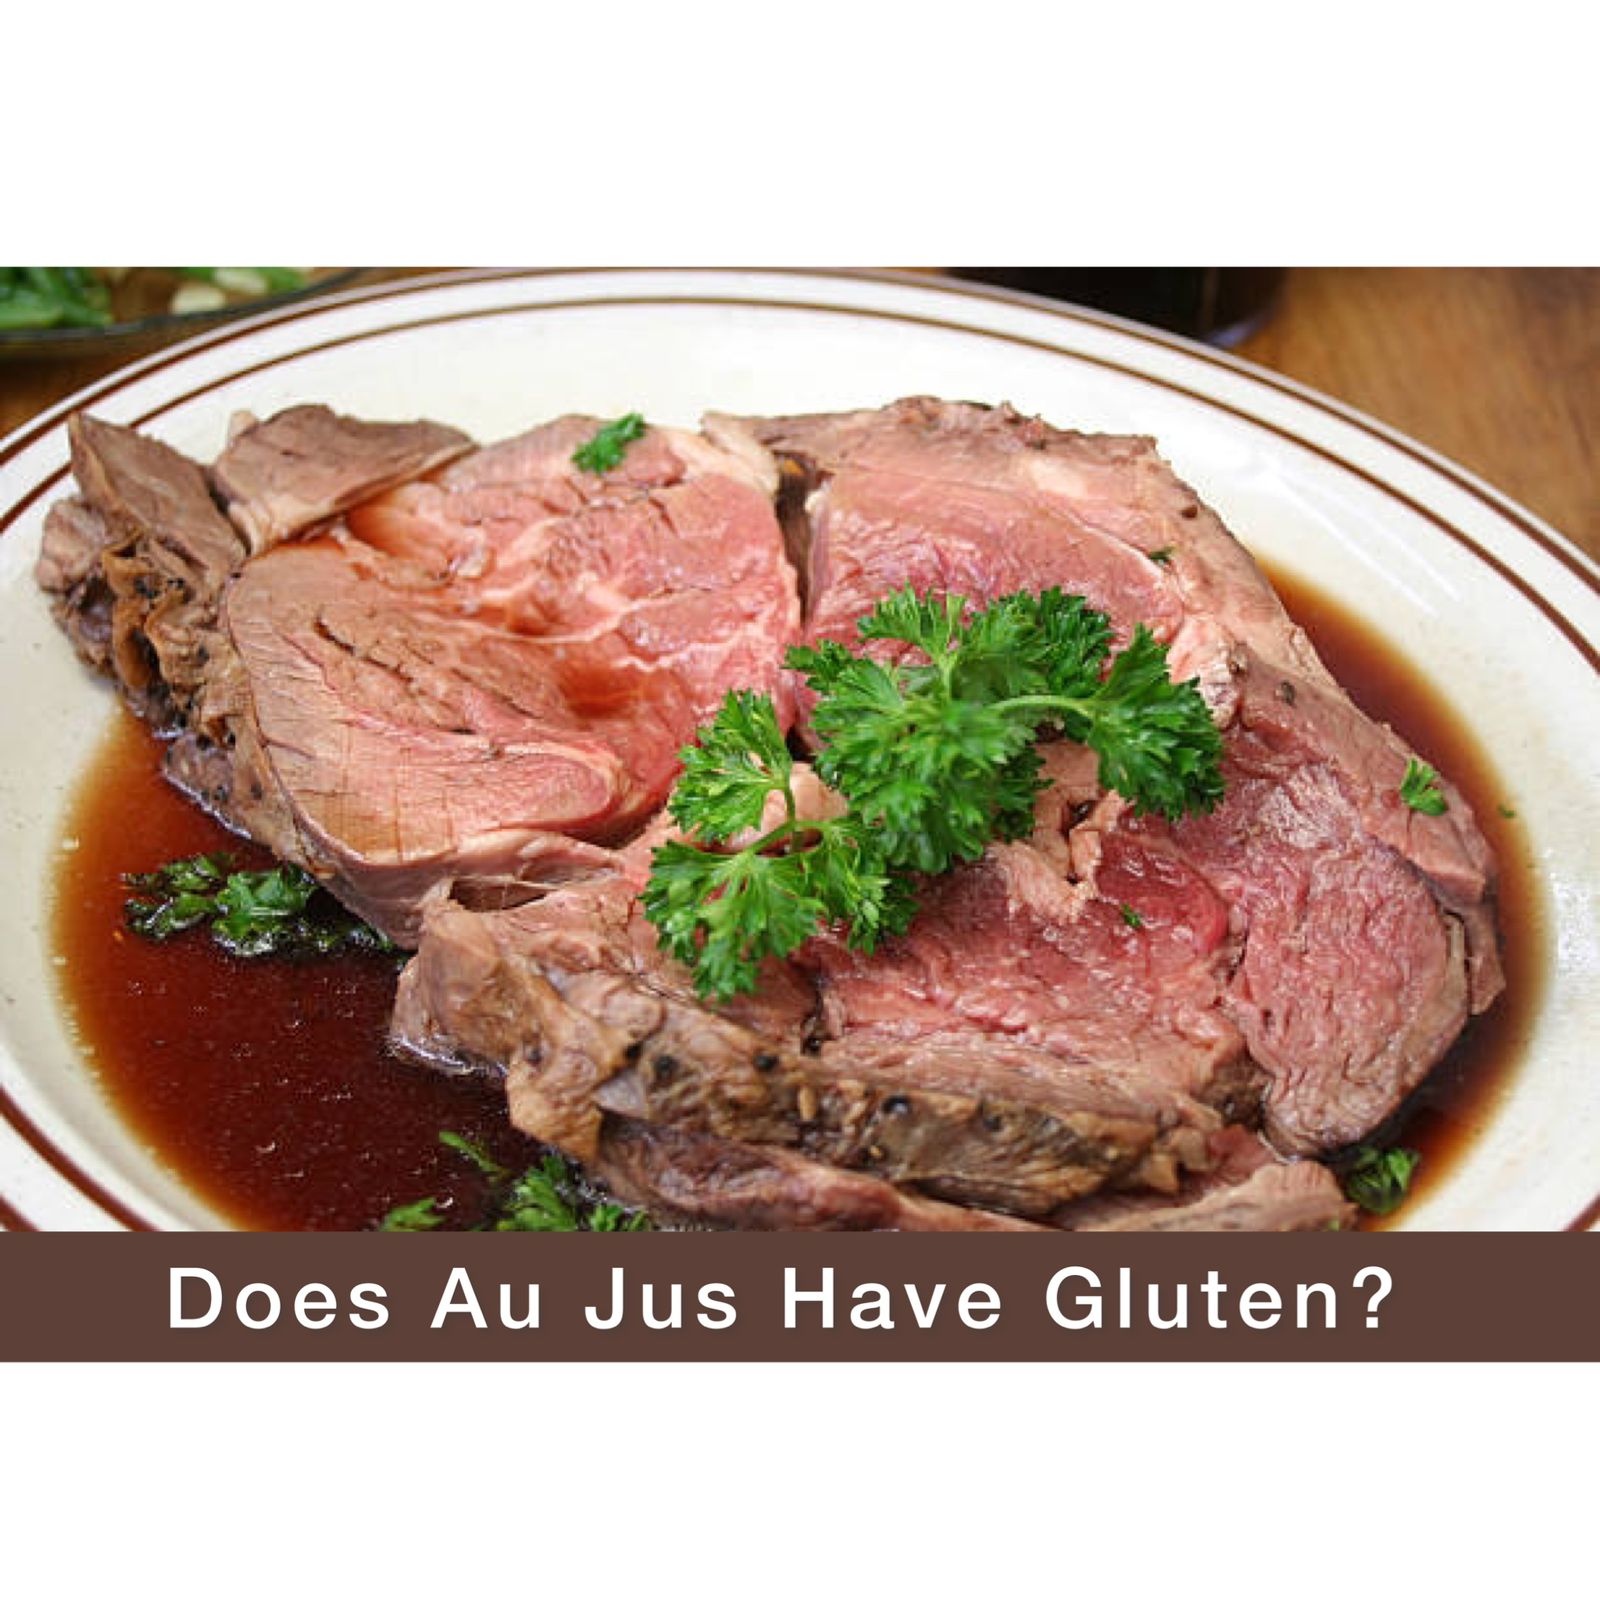 Does Au Jus Have Gluten? – Make Au Jus Sauce With 5 Easy Steps